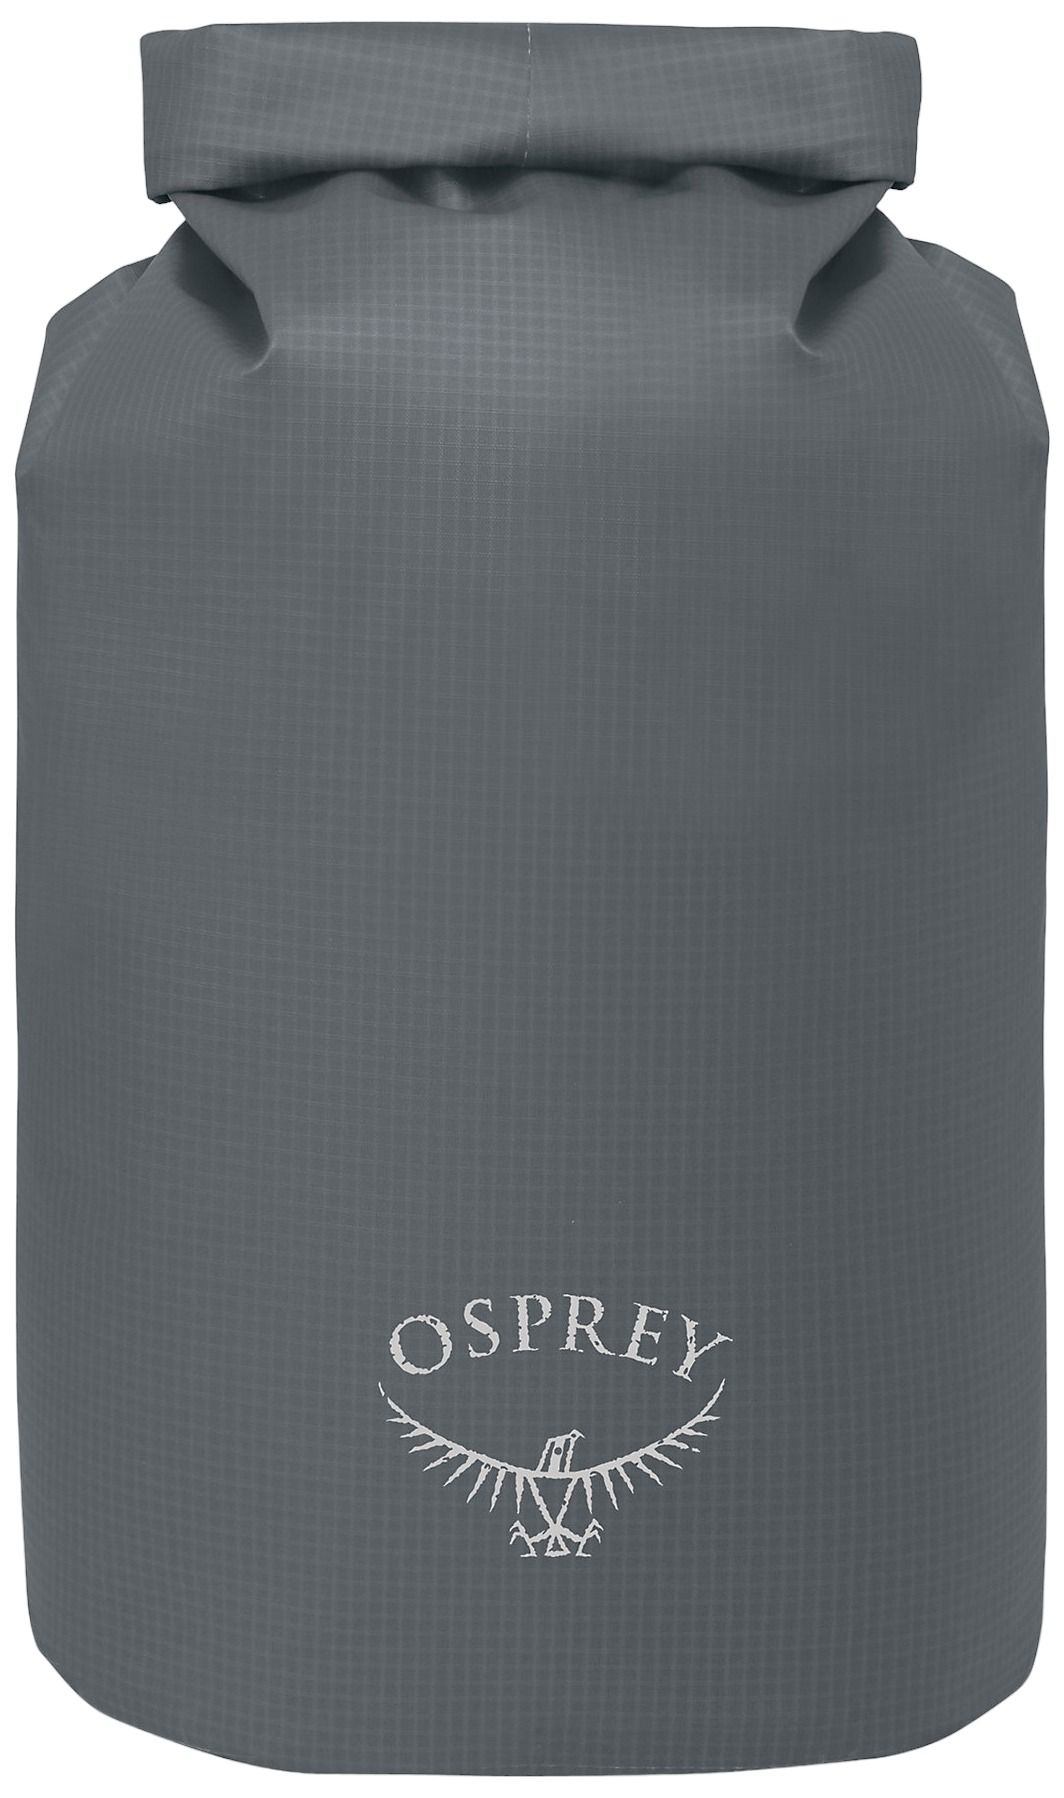 Photos - Outdoor Furniture Osprey Wildwater 15 Dry Bag, Tunnel Vision Grey 23TRYUWLDWTR15DRYCAC 